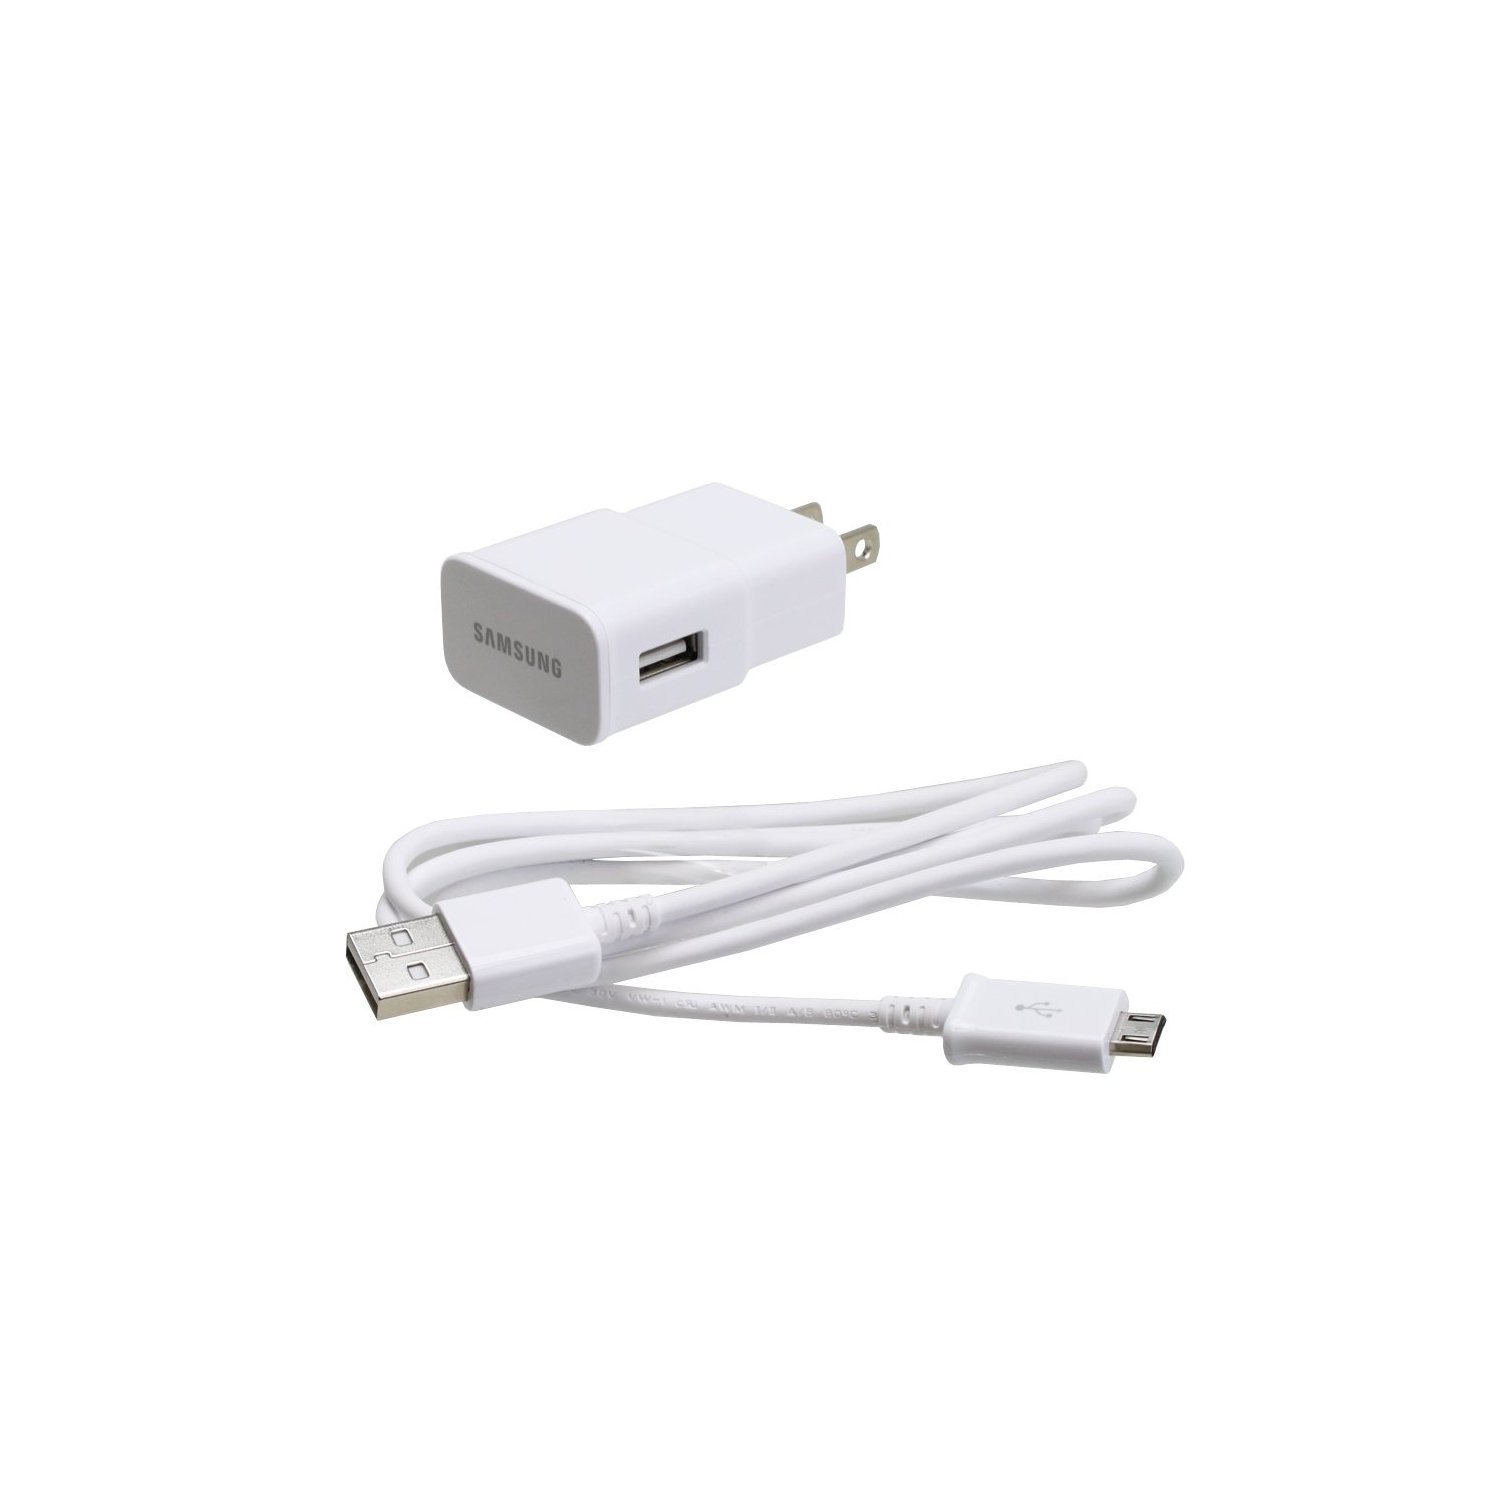 2.0A Travel Adapter Wall Charger + 1.5m Micro USB Cable for Samsung Galaxy S2 S3 S4 Note 2 on5 Grand Prime, White